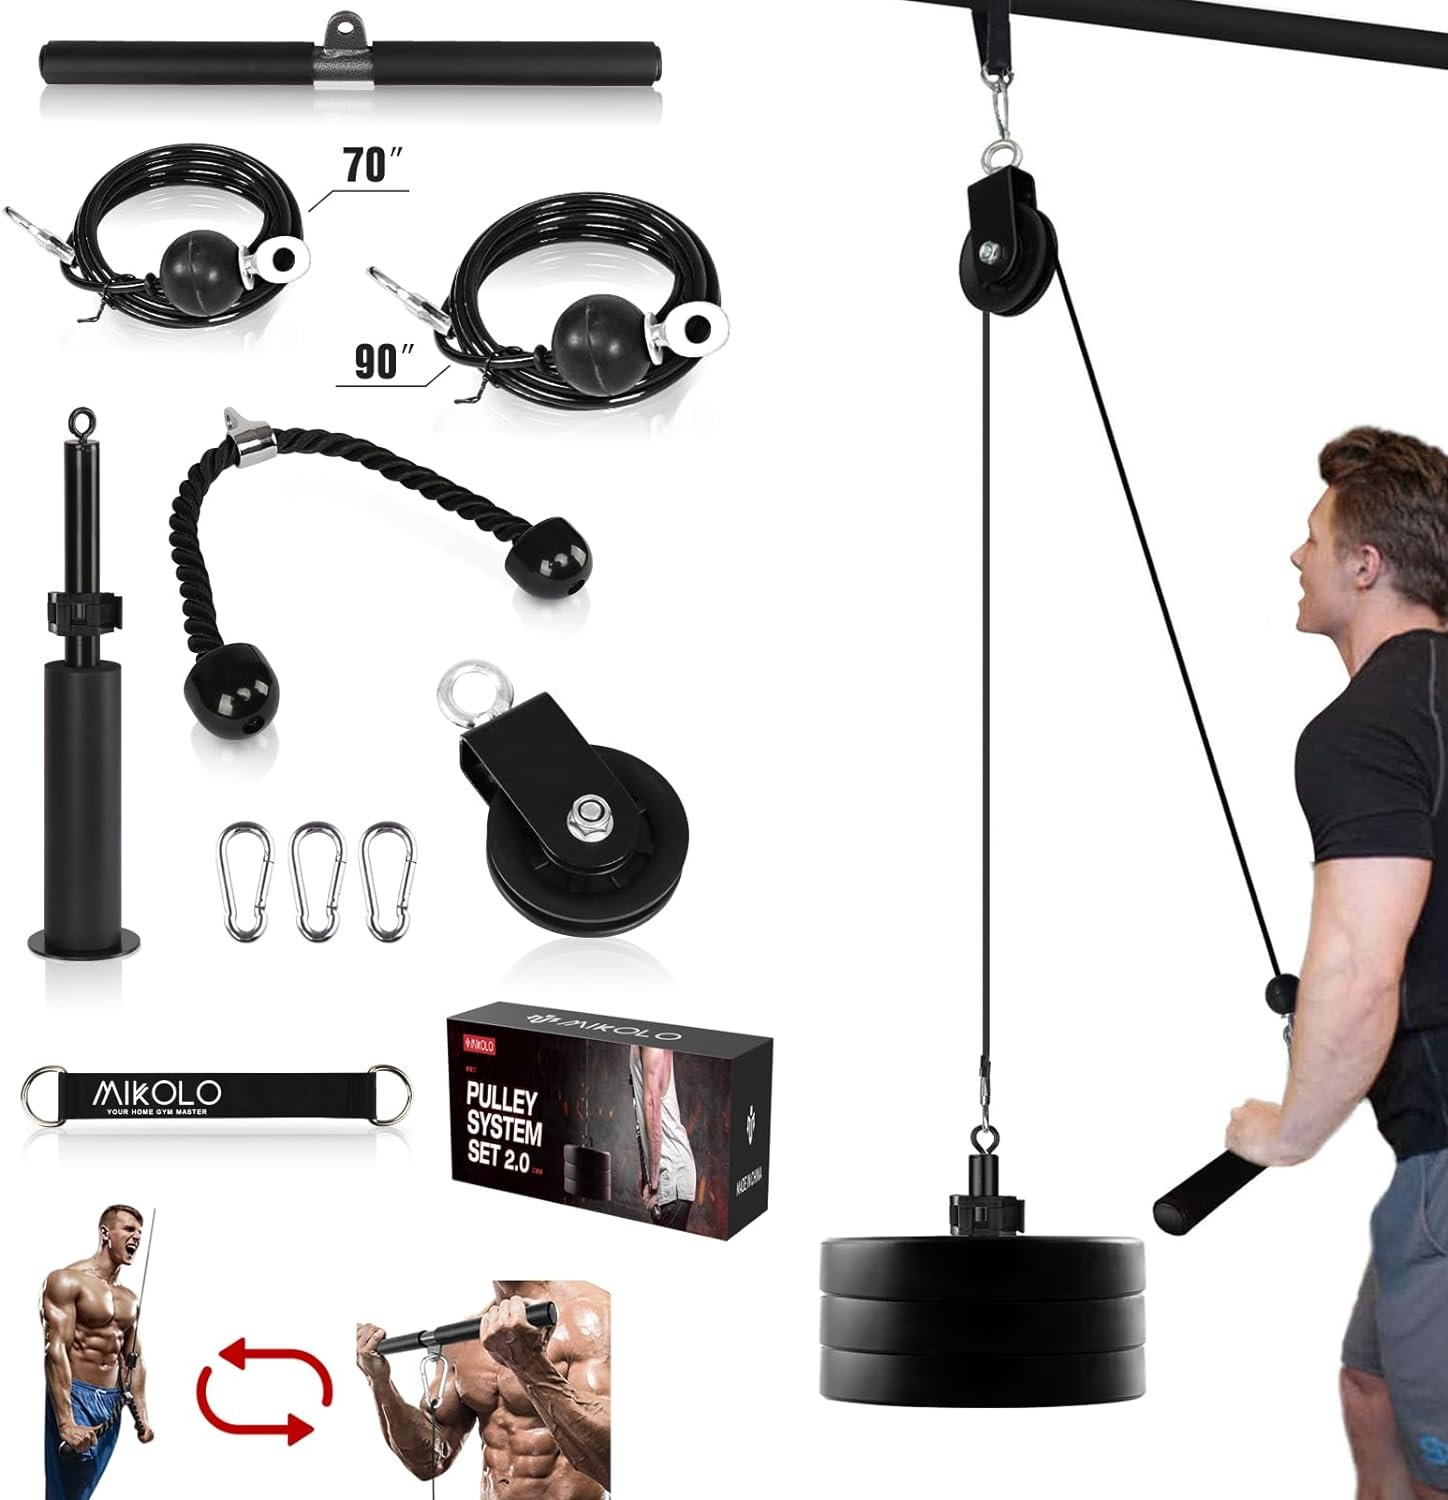 Mikolo Fitness LAT and Lift Pulley System Review